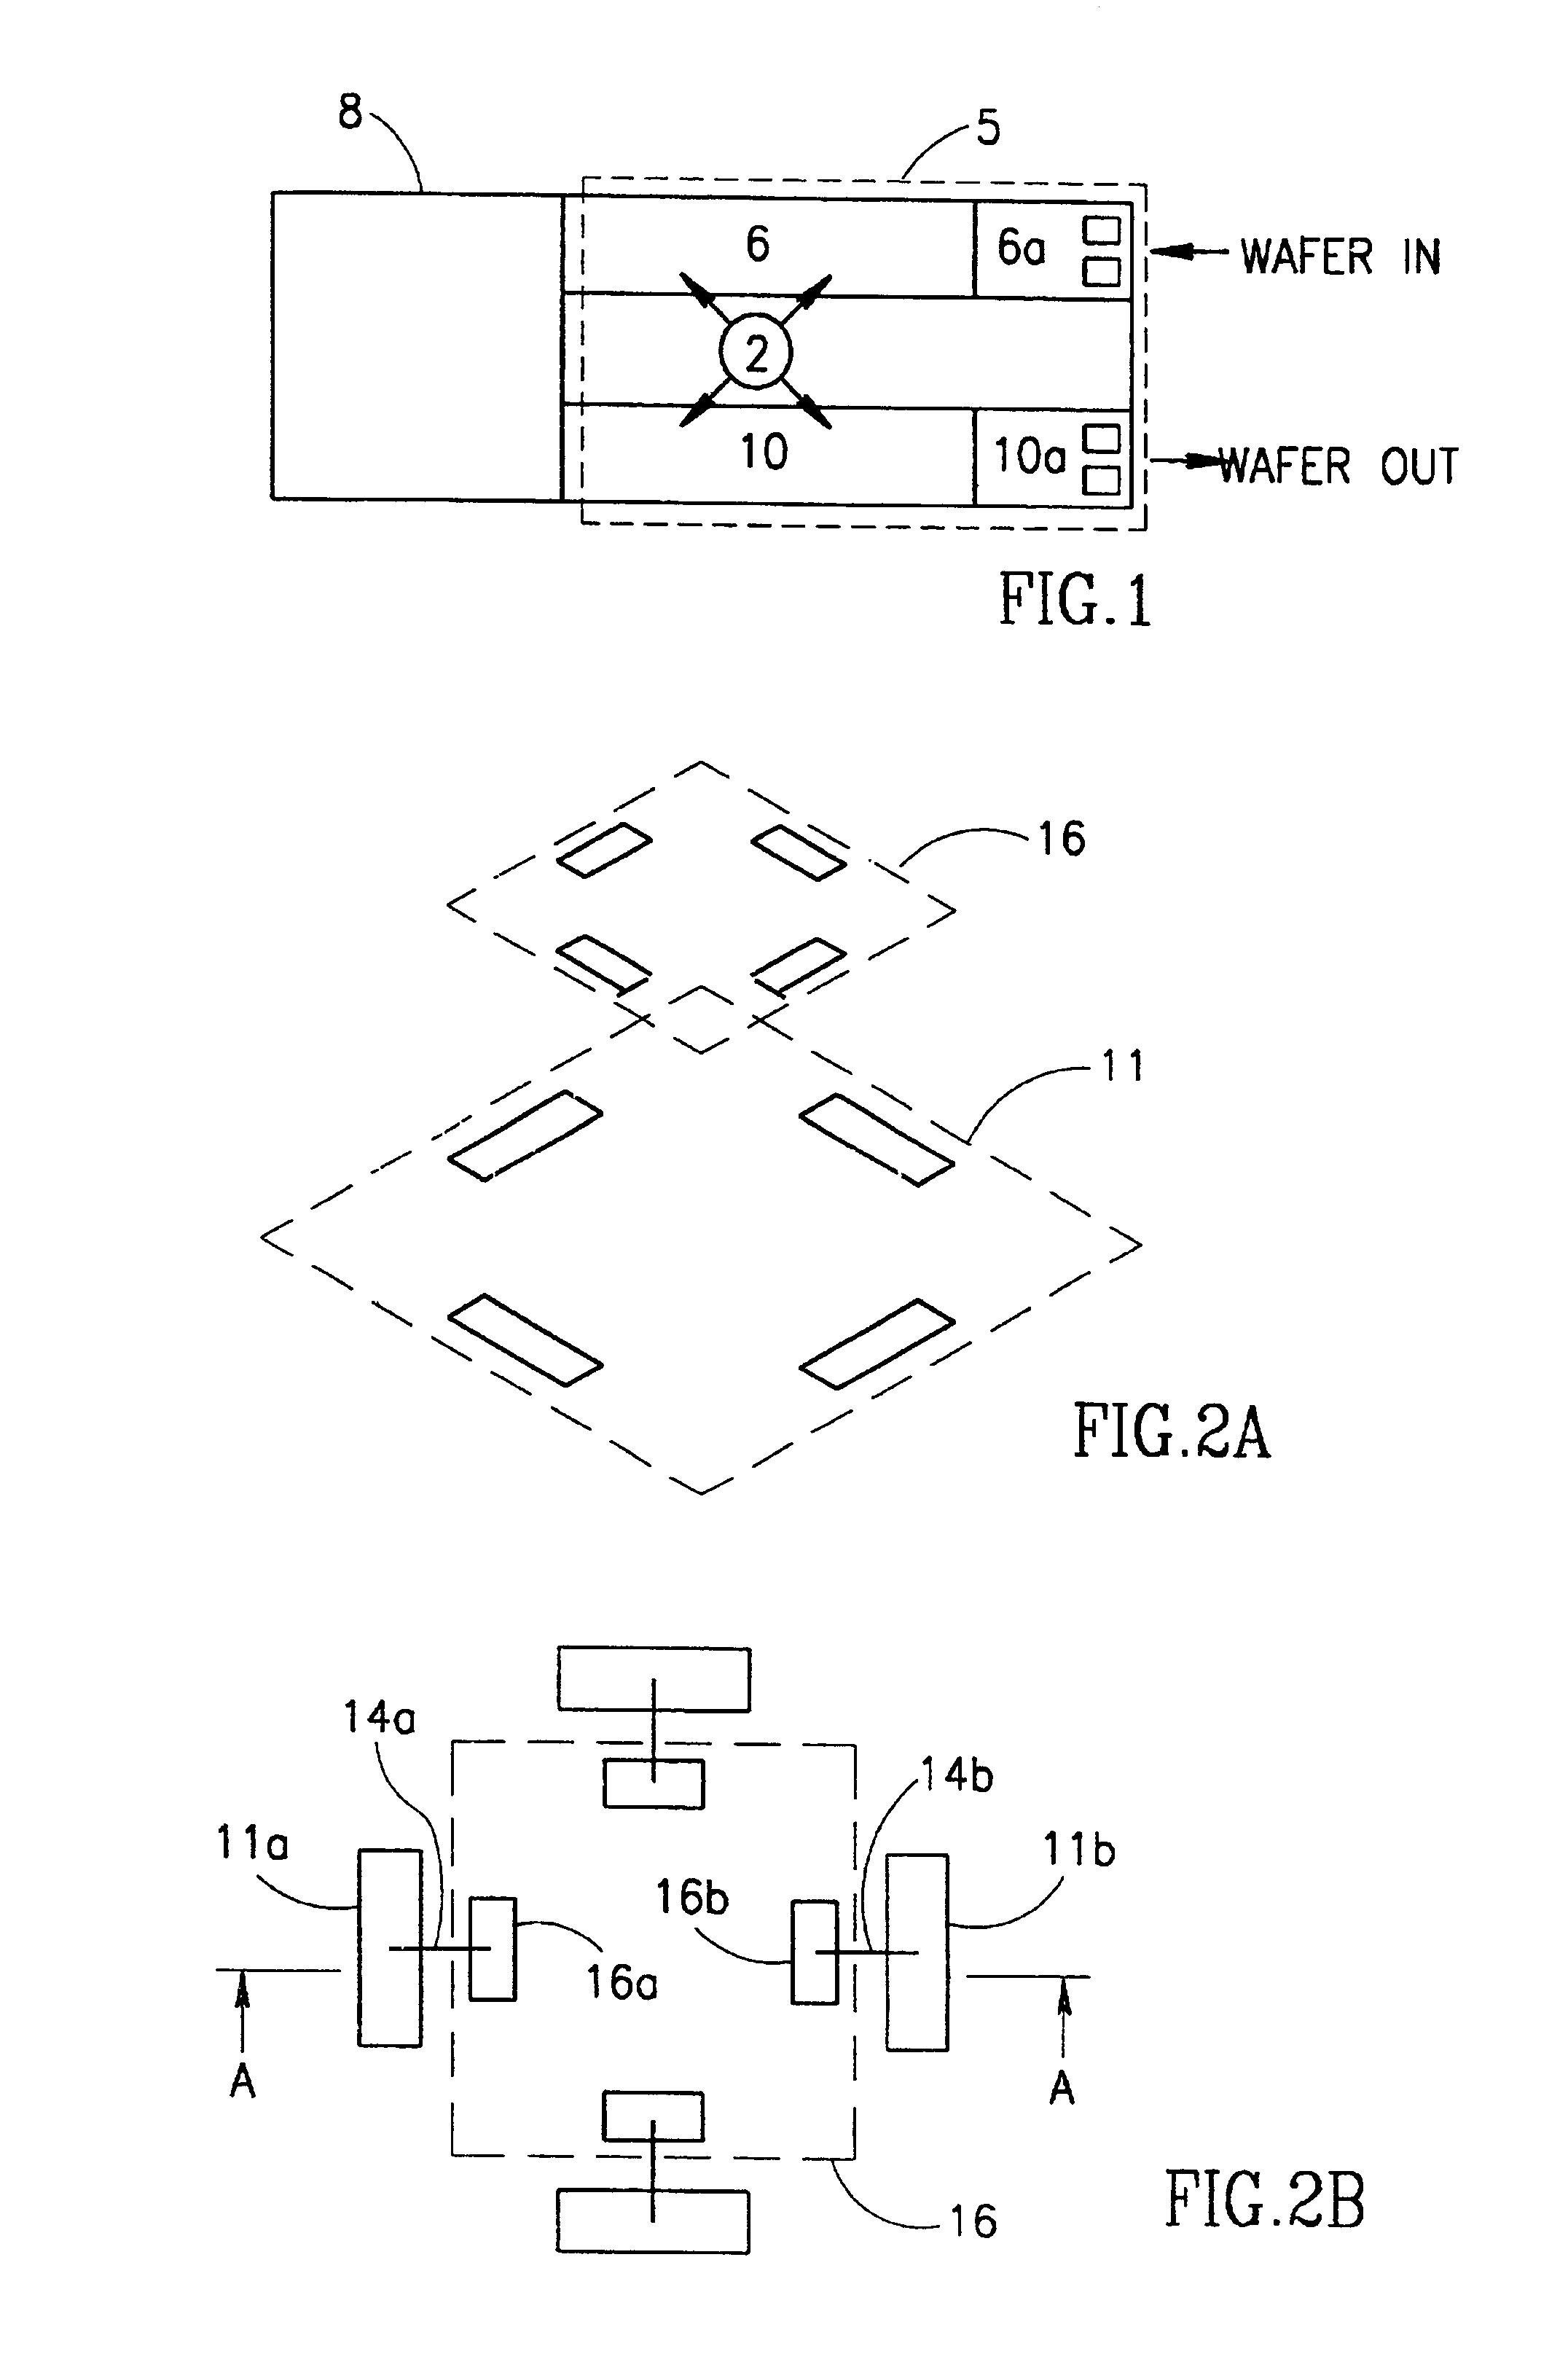 Monitoring apparatus and method particularly useful in photolithographically processing substrates